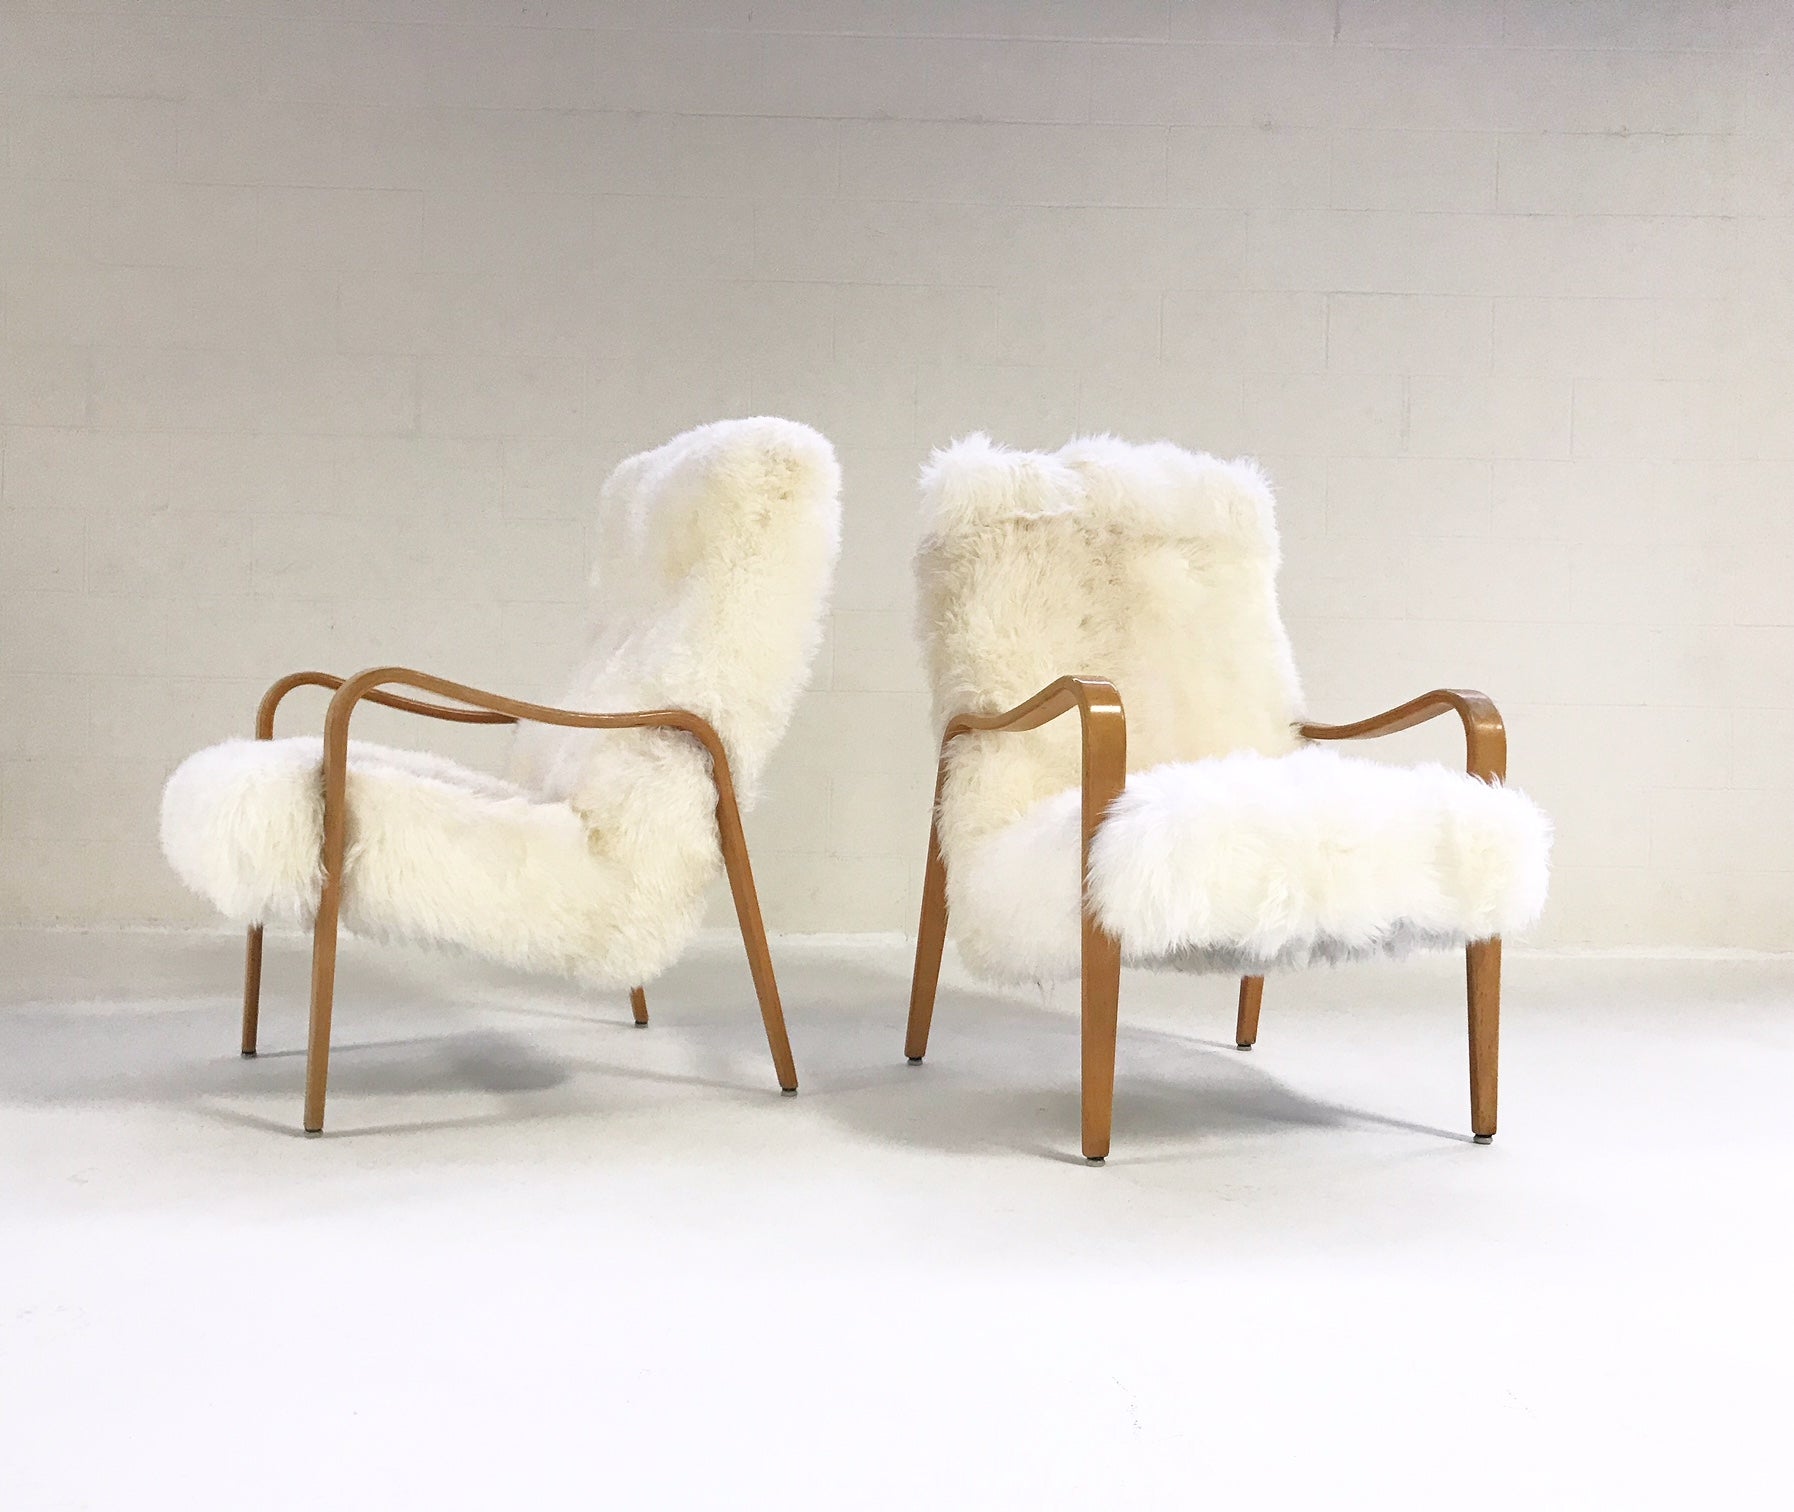 Bentwood Chairs in New Zealand Sheepskin, pair - FORSYTH